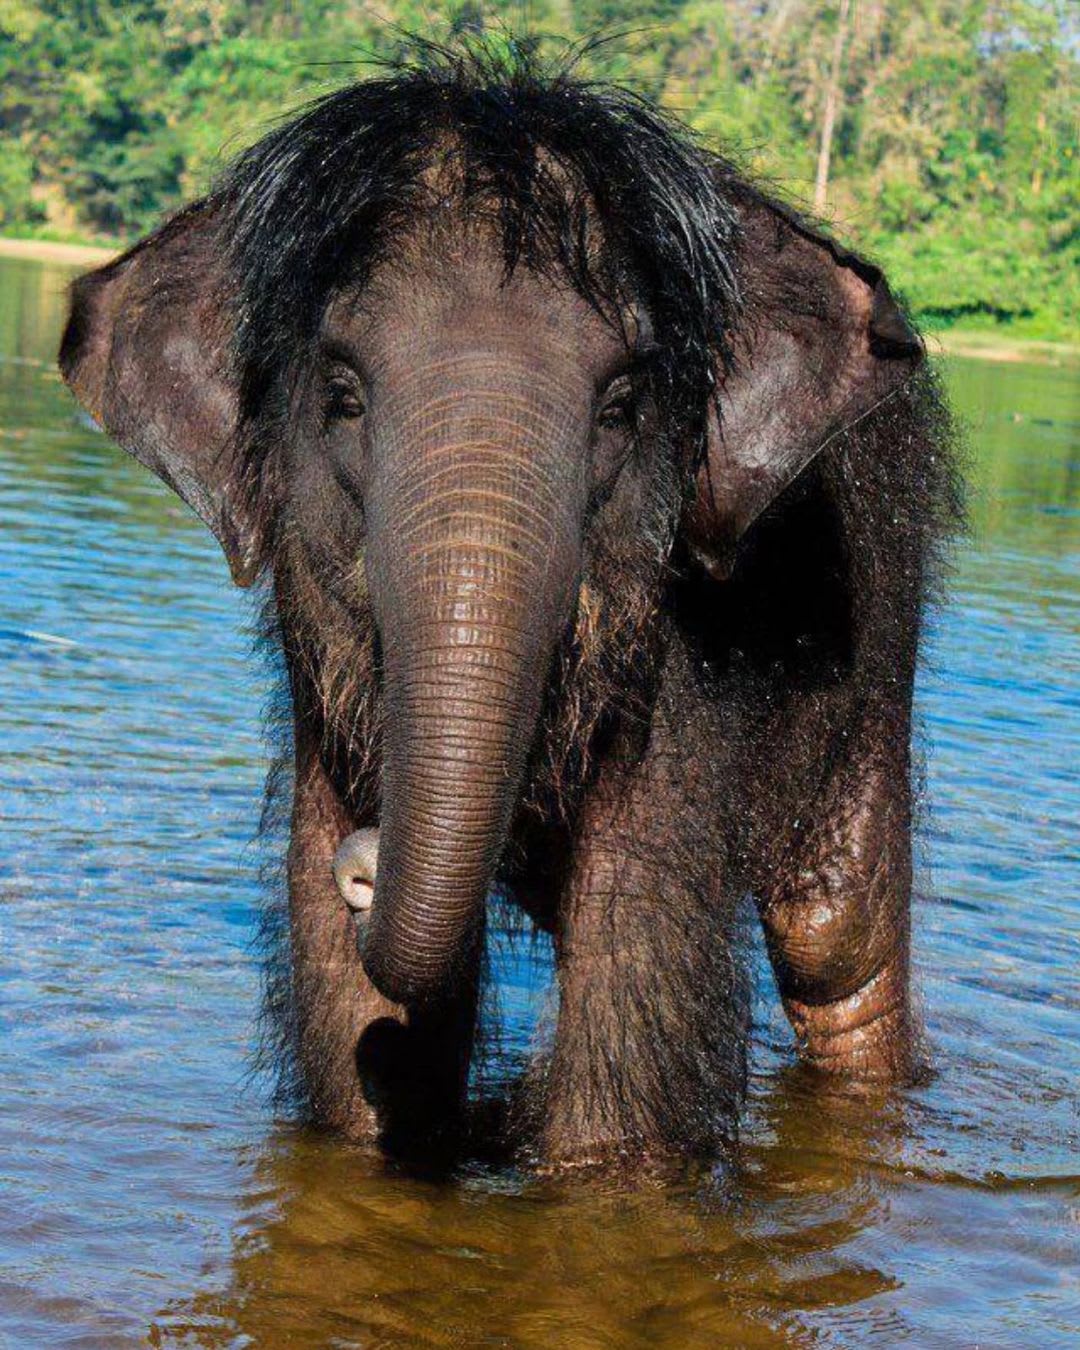 A photo of an Asian elephant that has long hair growth on his body